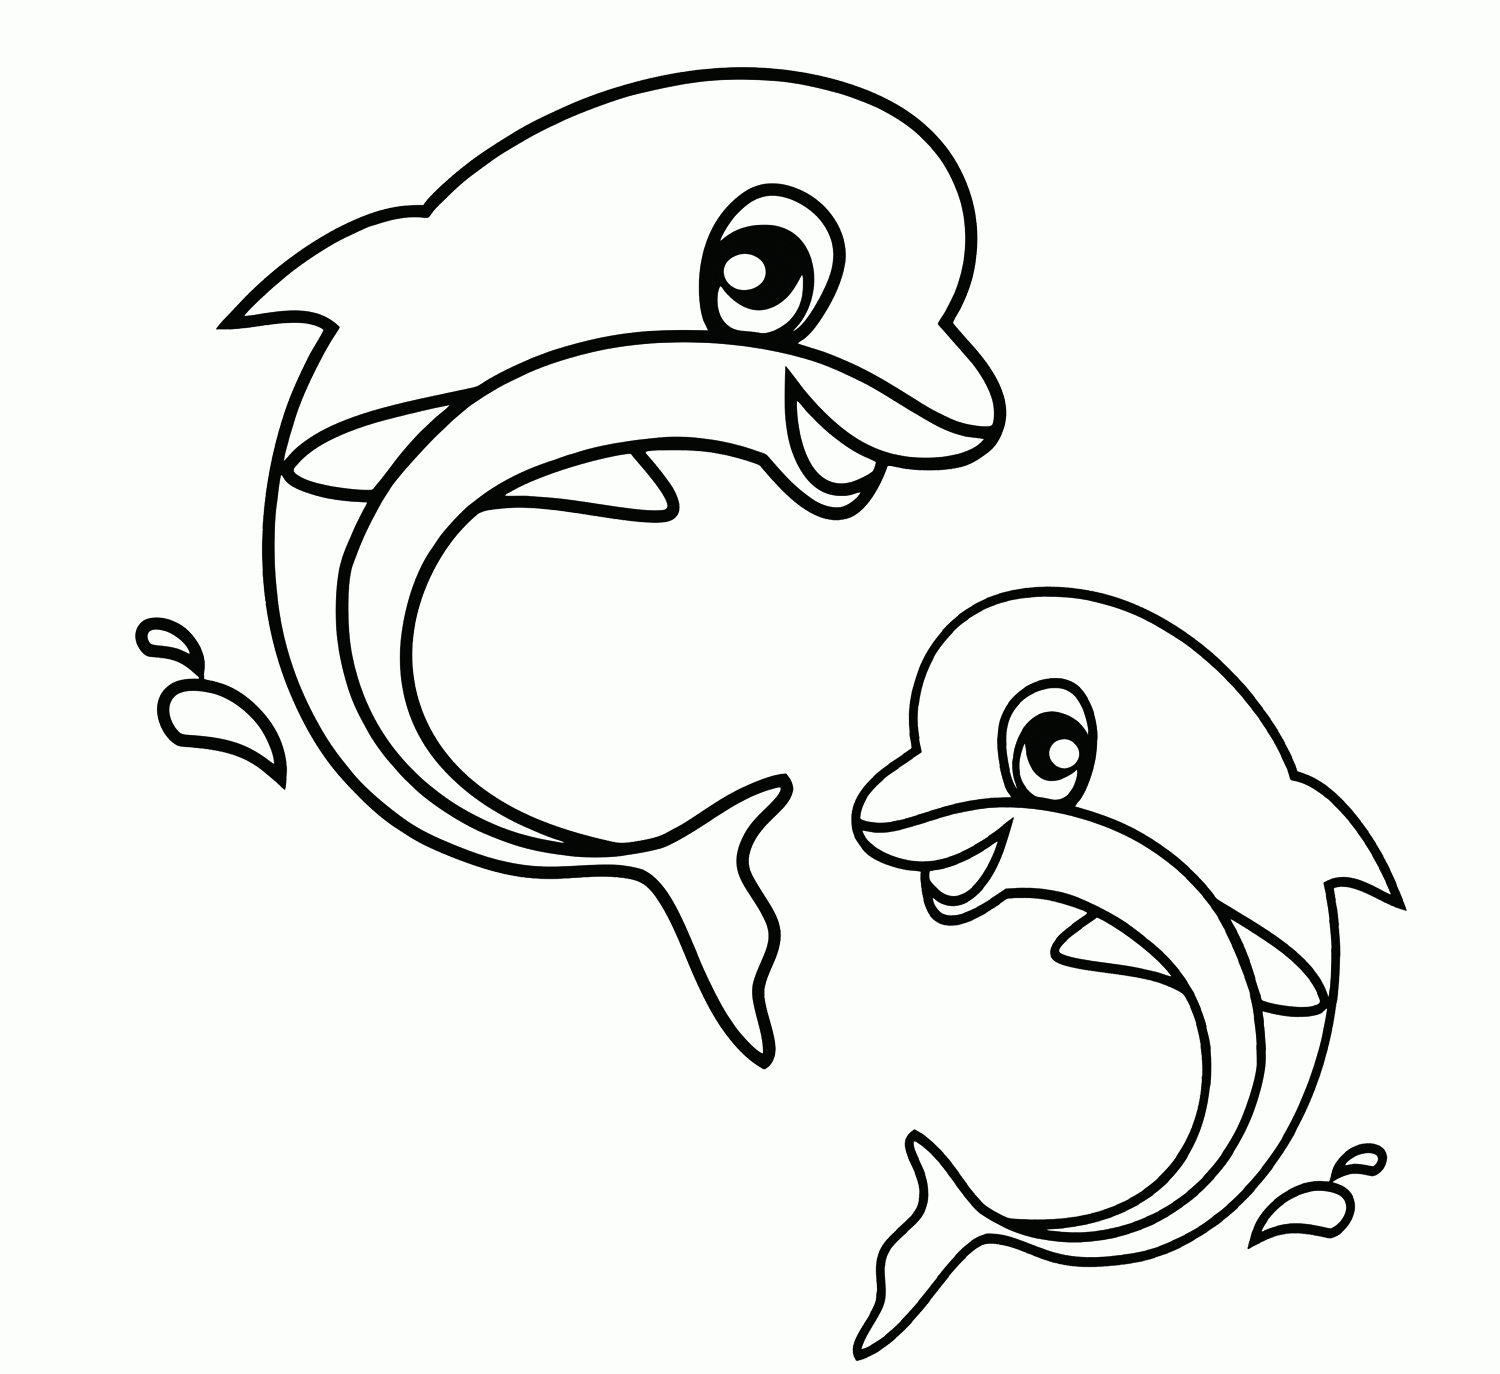 Related Ocean Coloring Pages item-9961, Ocean Coloring Pages Sea ...